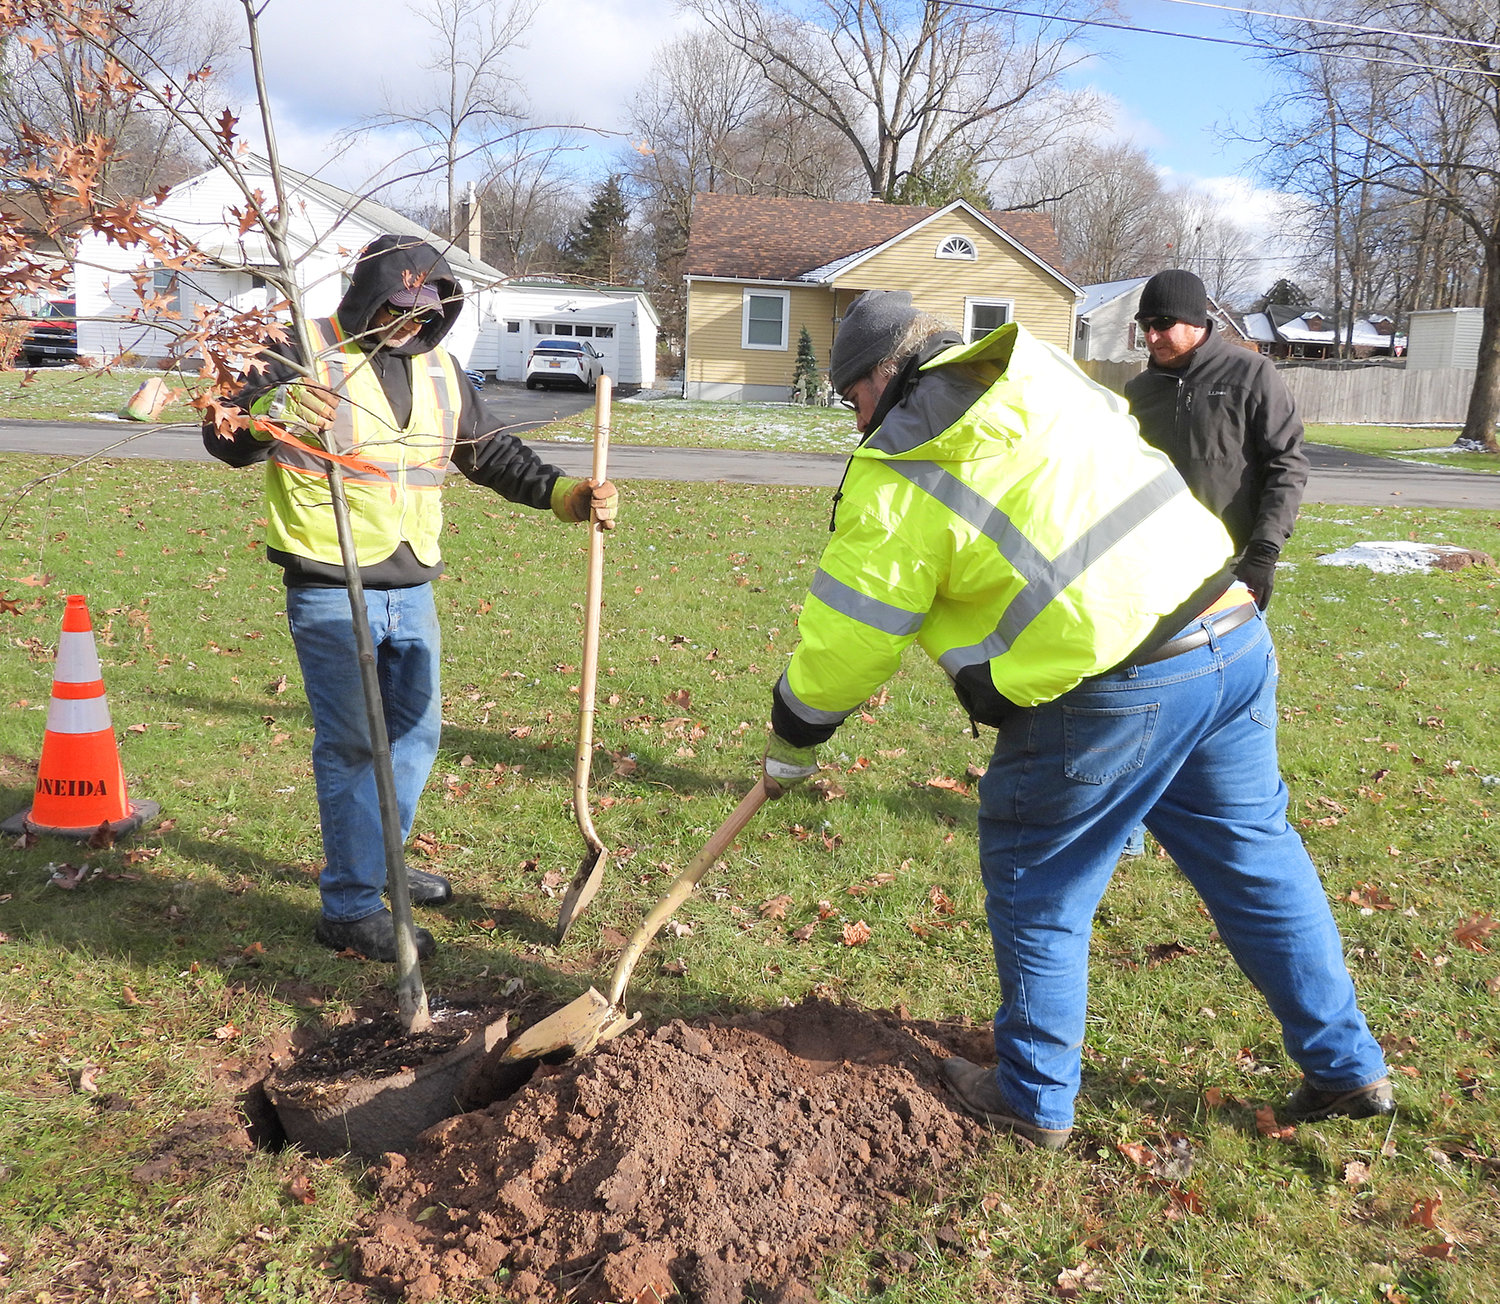 A NEW OAK — The Oneida City Department of Public Works plants a new oak tree in Lincoln Park on Tuesday, keeping their Tree City USA commitment and replacing trees that were plagued by emerald ash borers.